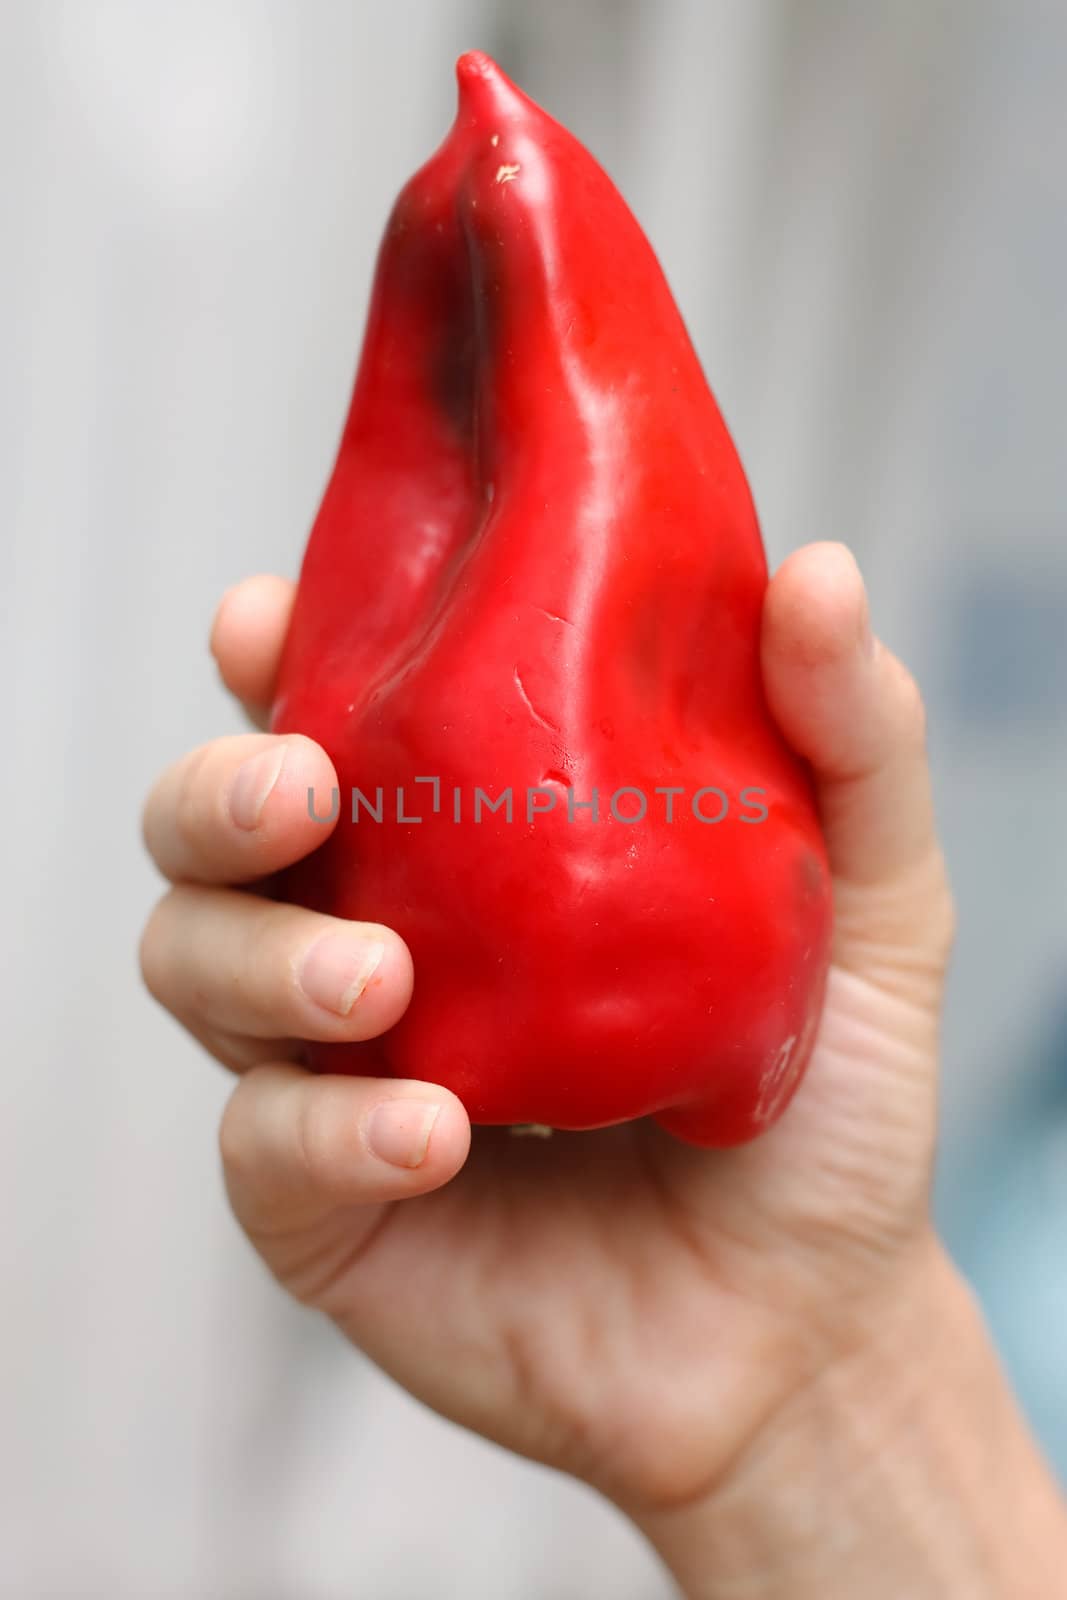 The one pepper in one hand.